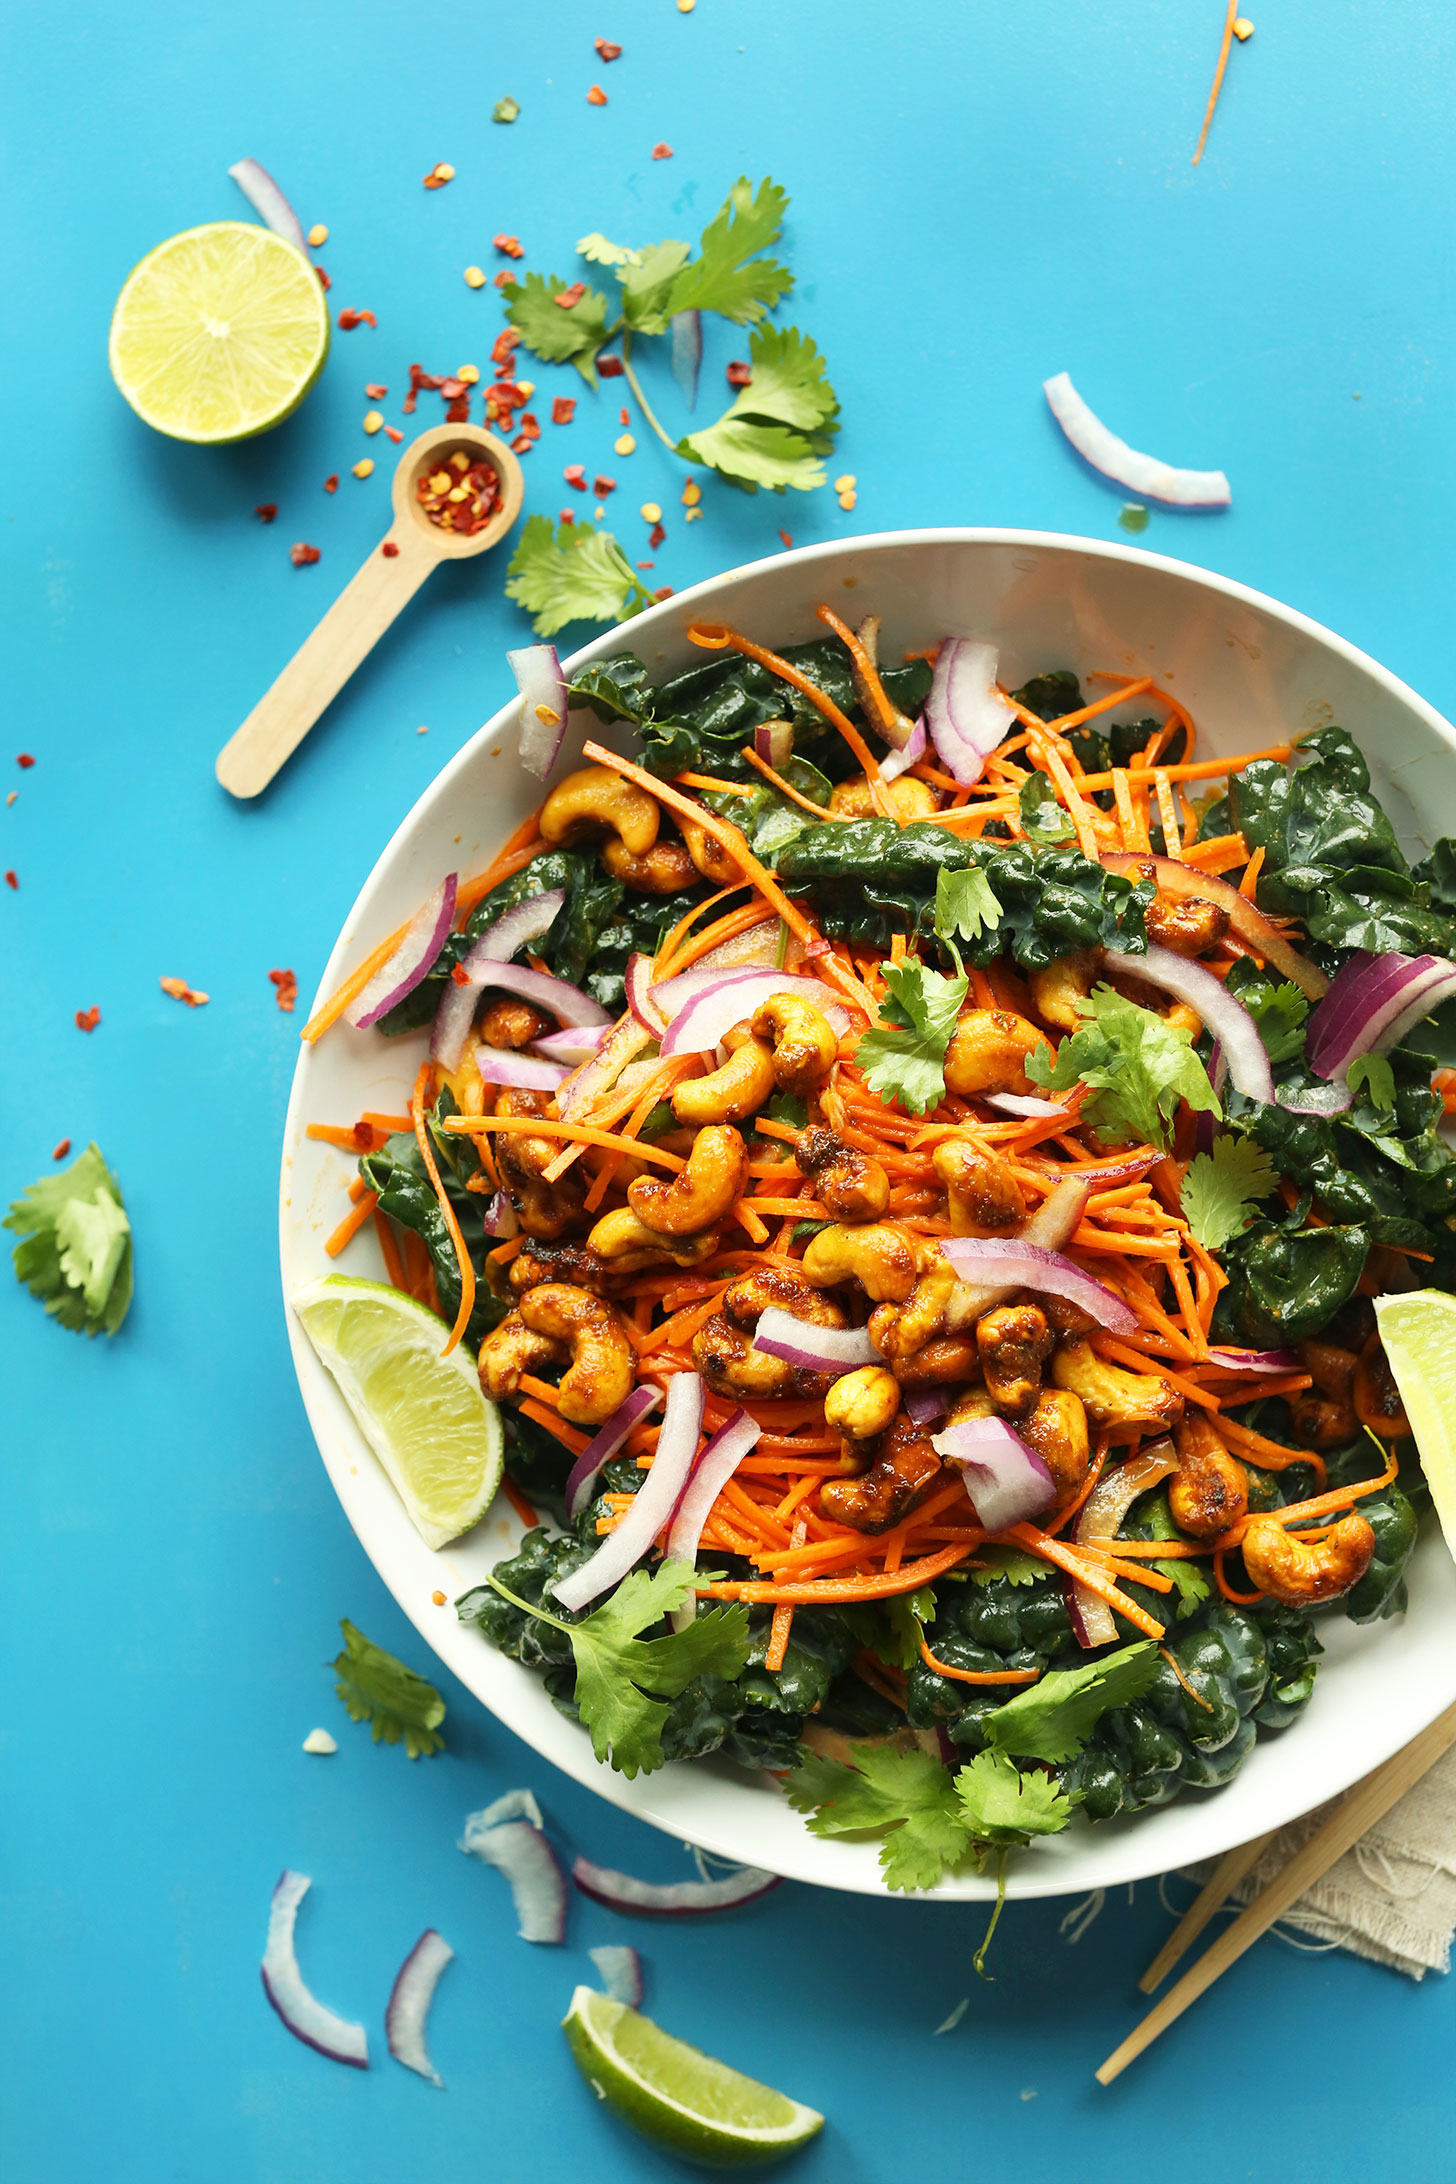 Serving bowl full of our gluten-free vegan Thai Carrot Kale Salad with Curried Cashews